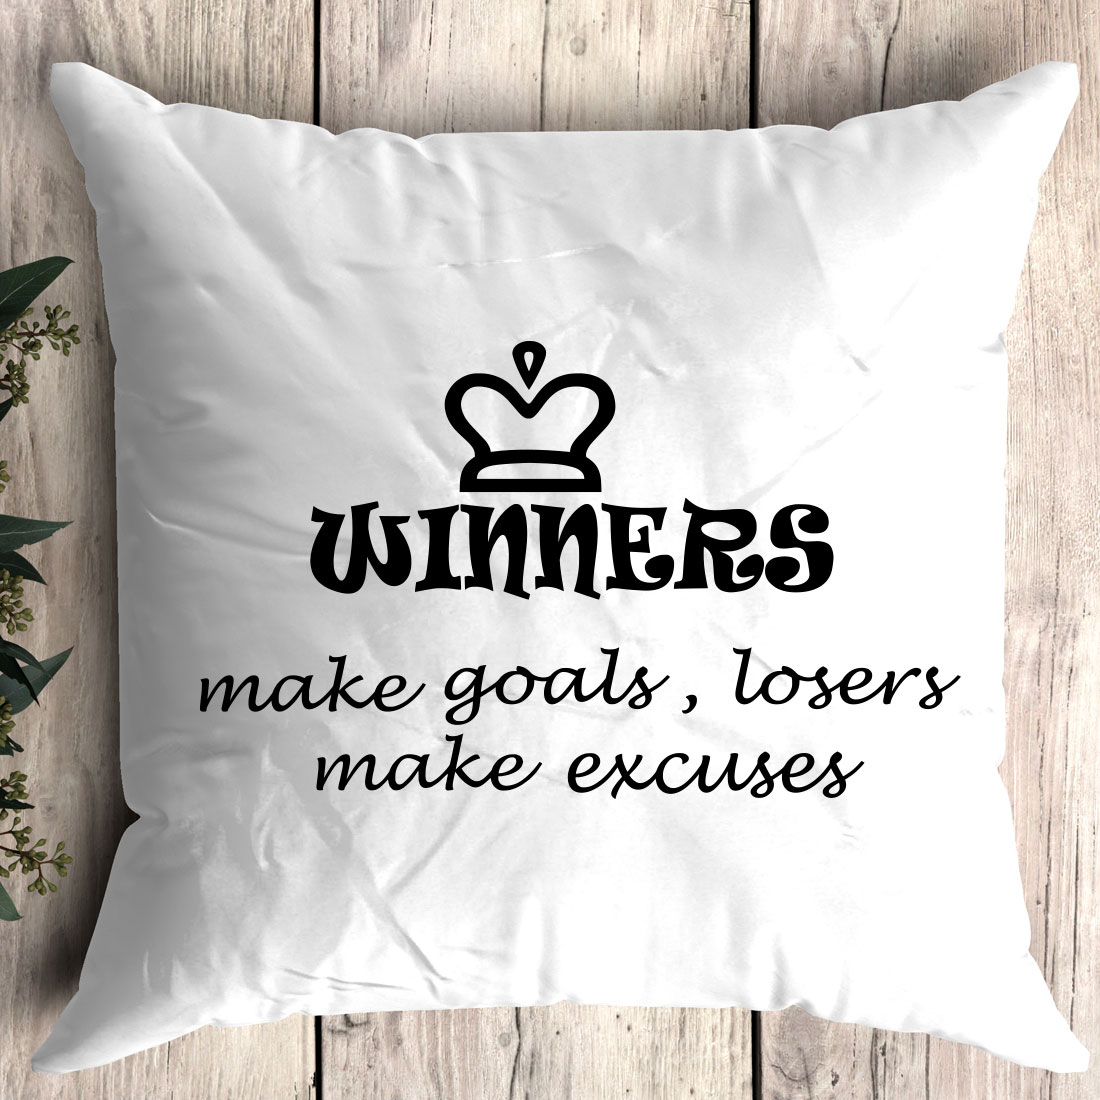 White pillow with the words winners make goals.